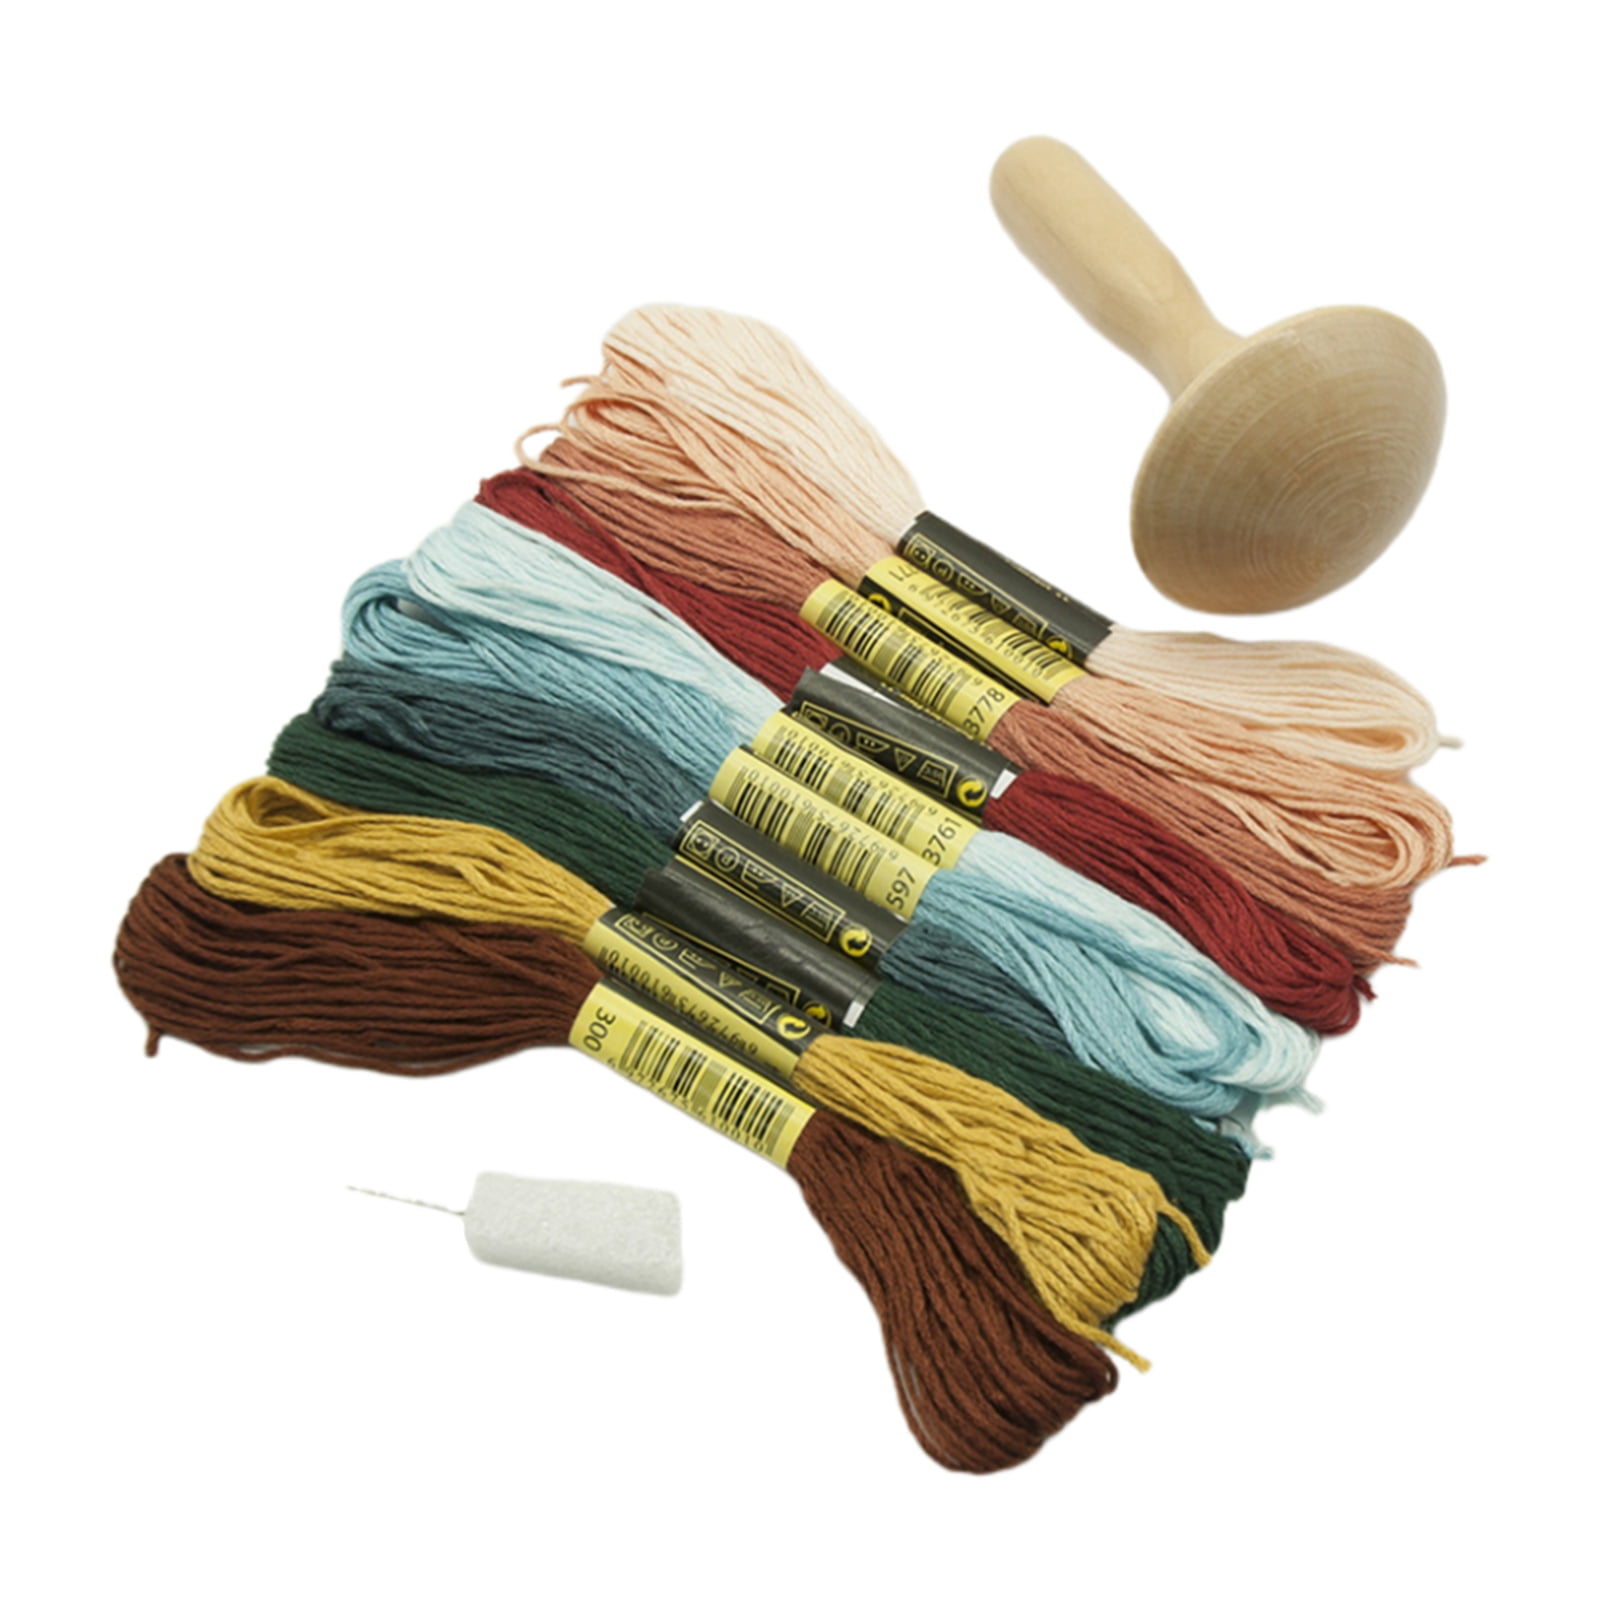 Wooden Darning Mushroom Supplies Kit Patching Threads Tool Sewing Tools for DIY Sewing Home Socks Sweaters 